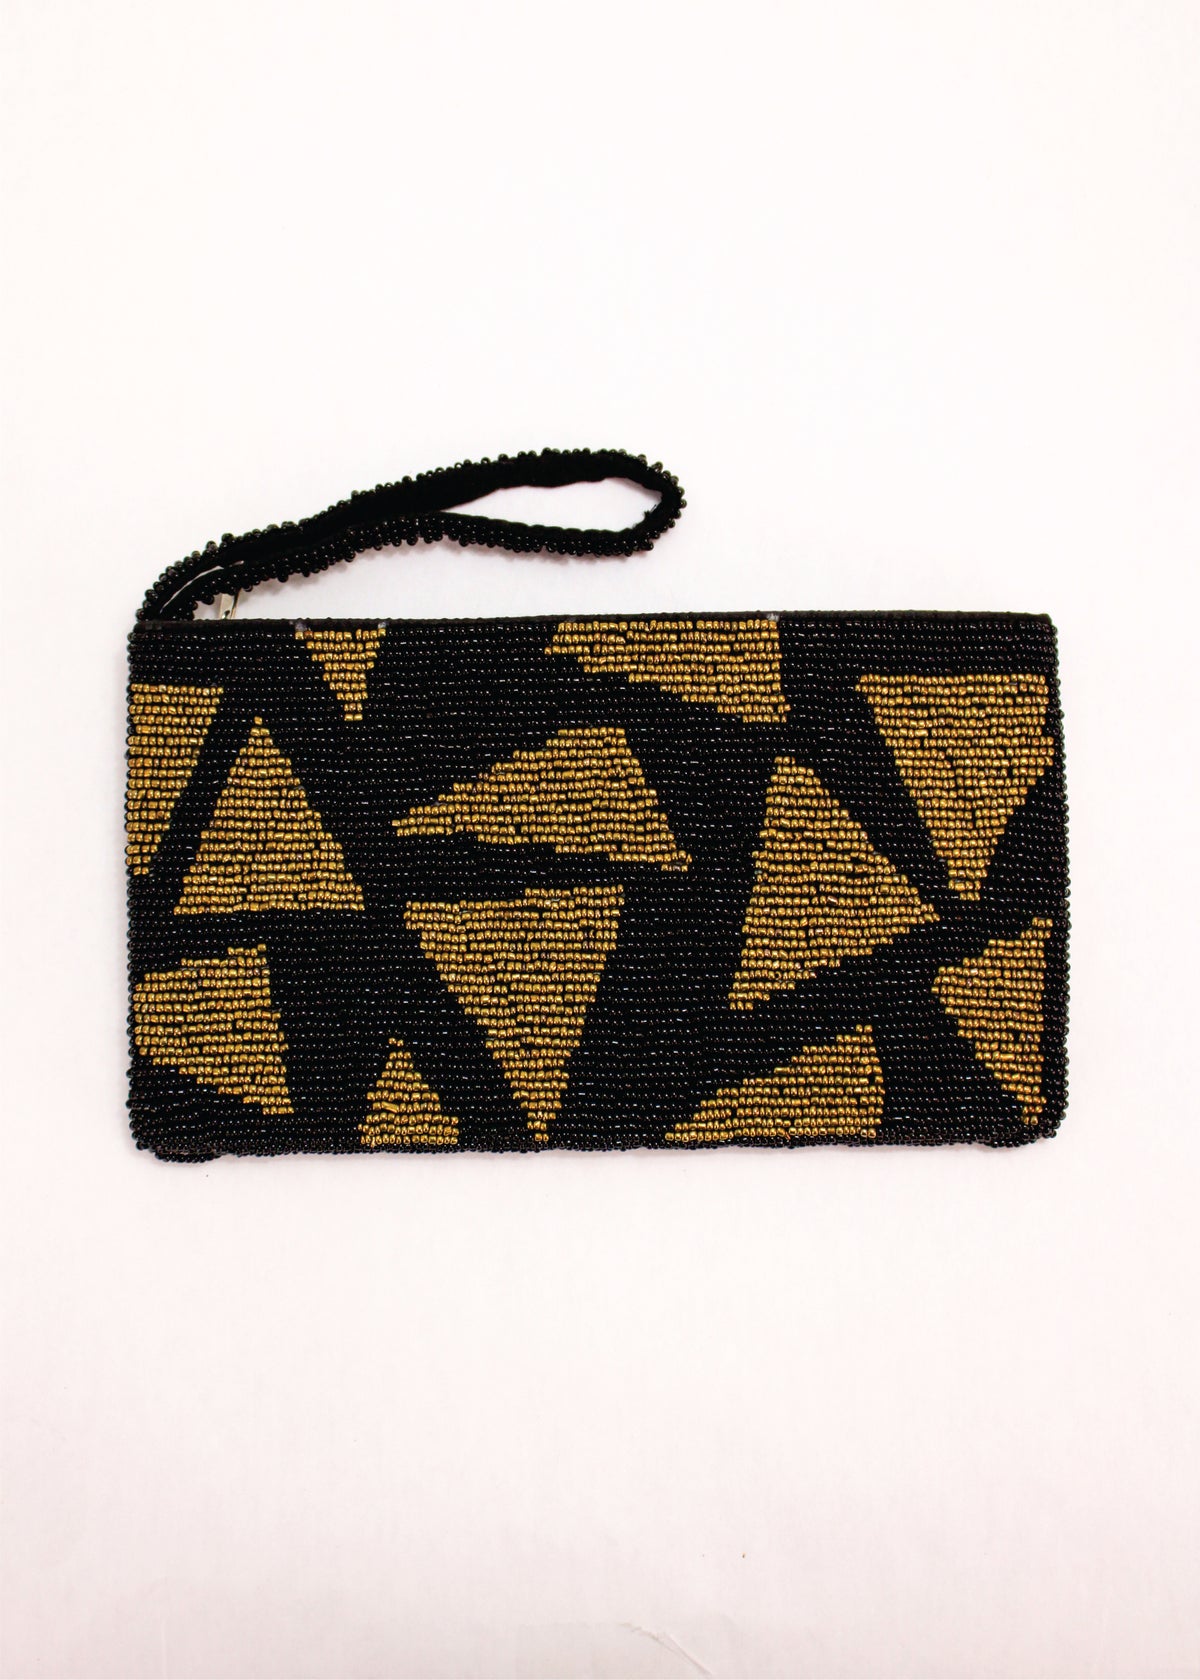 Abstract Tile Clutch